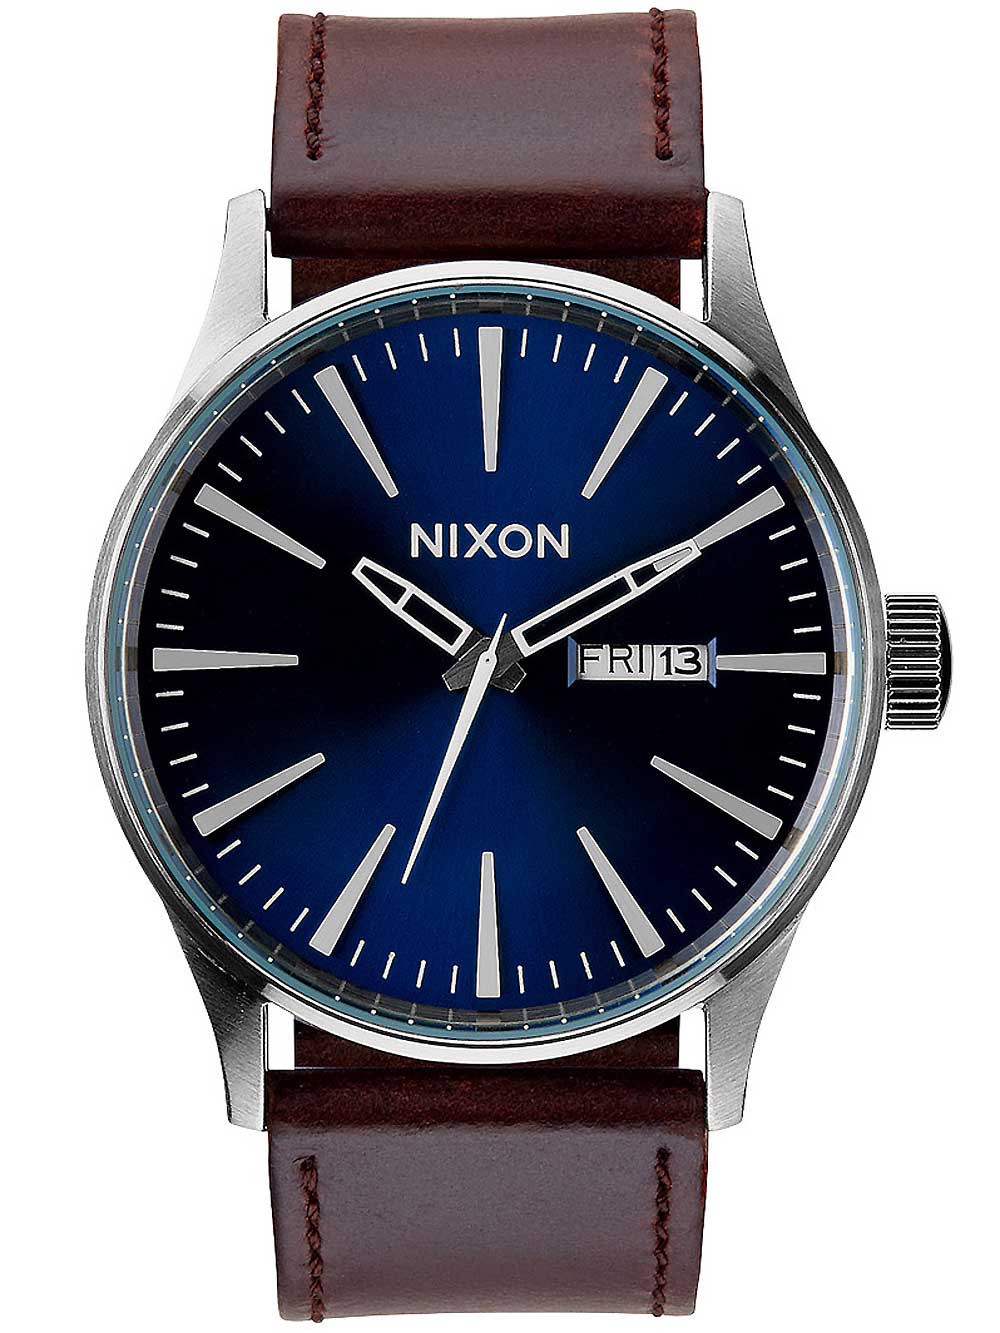 NIXON A105-1524 Sentry Leather Blue Brown 42mm 10ATM